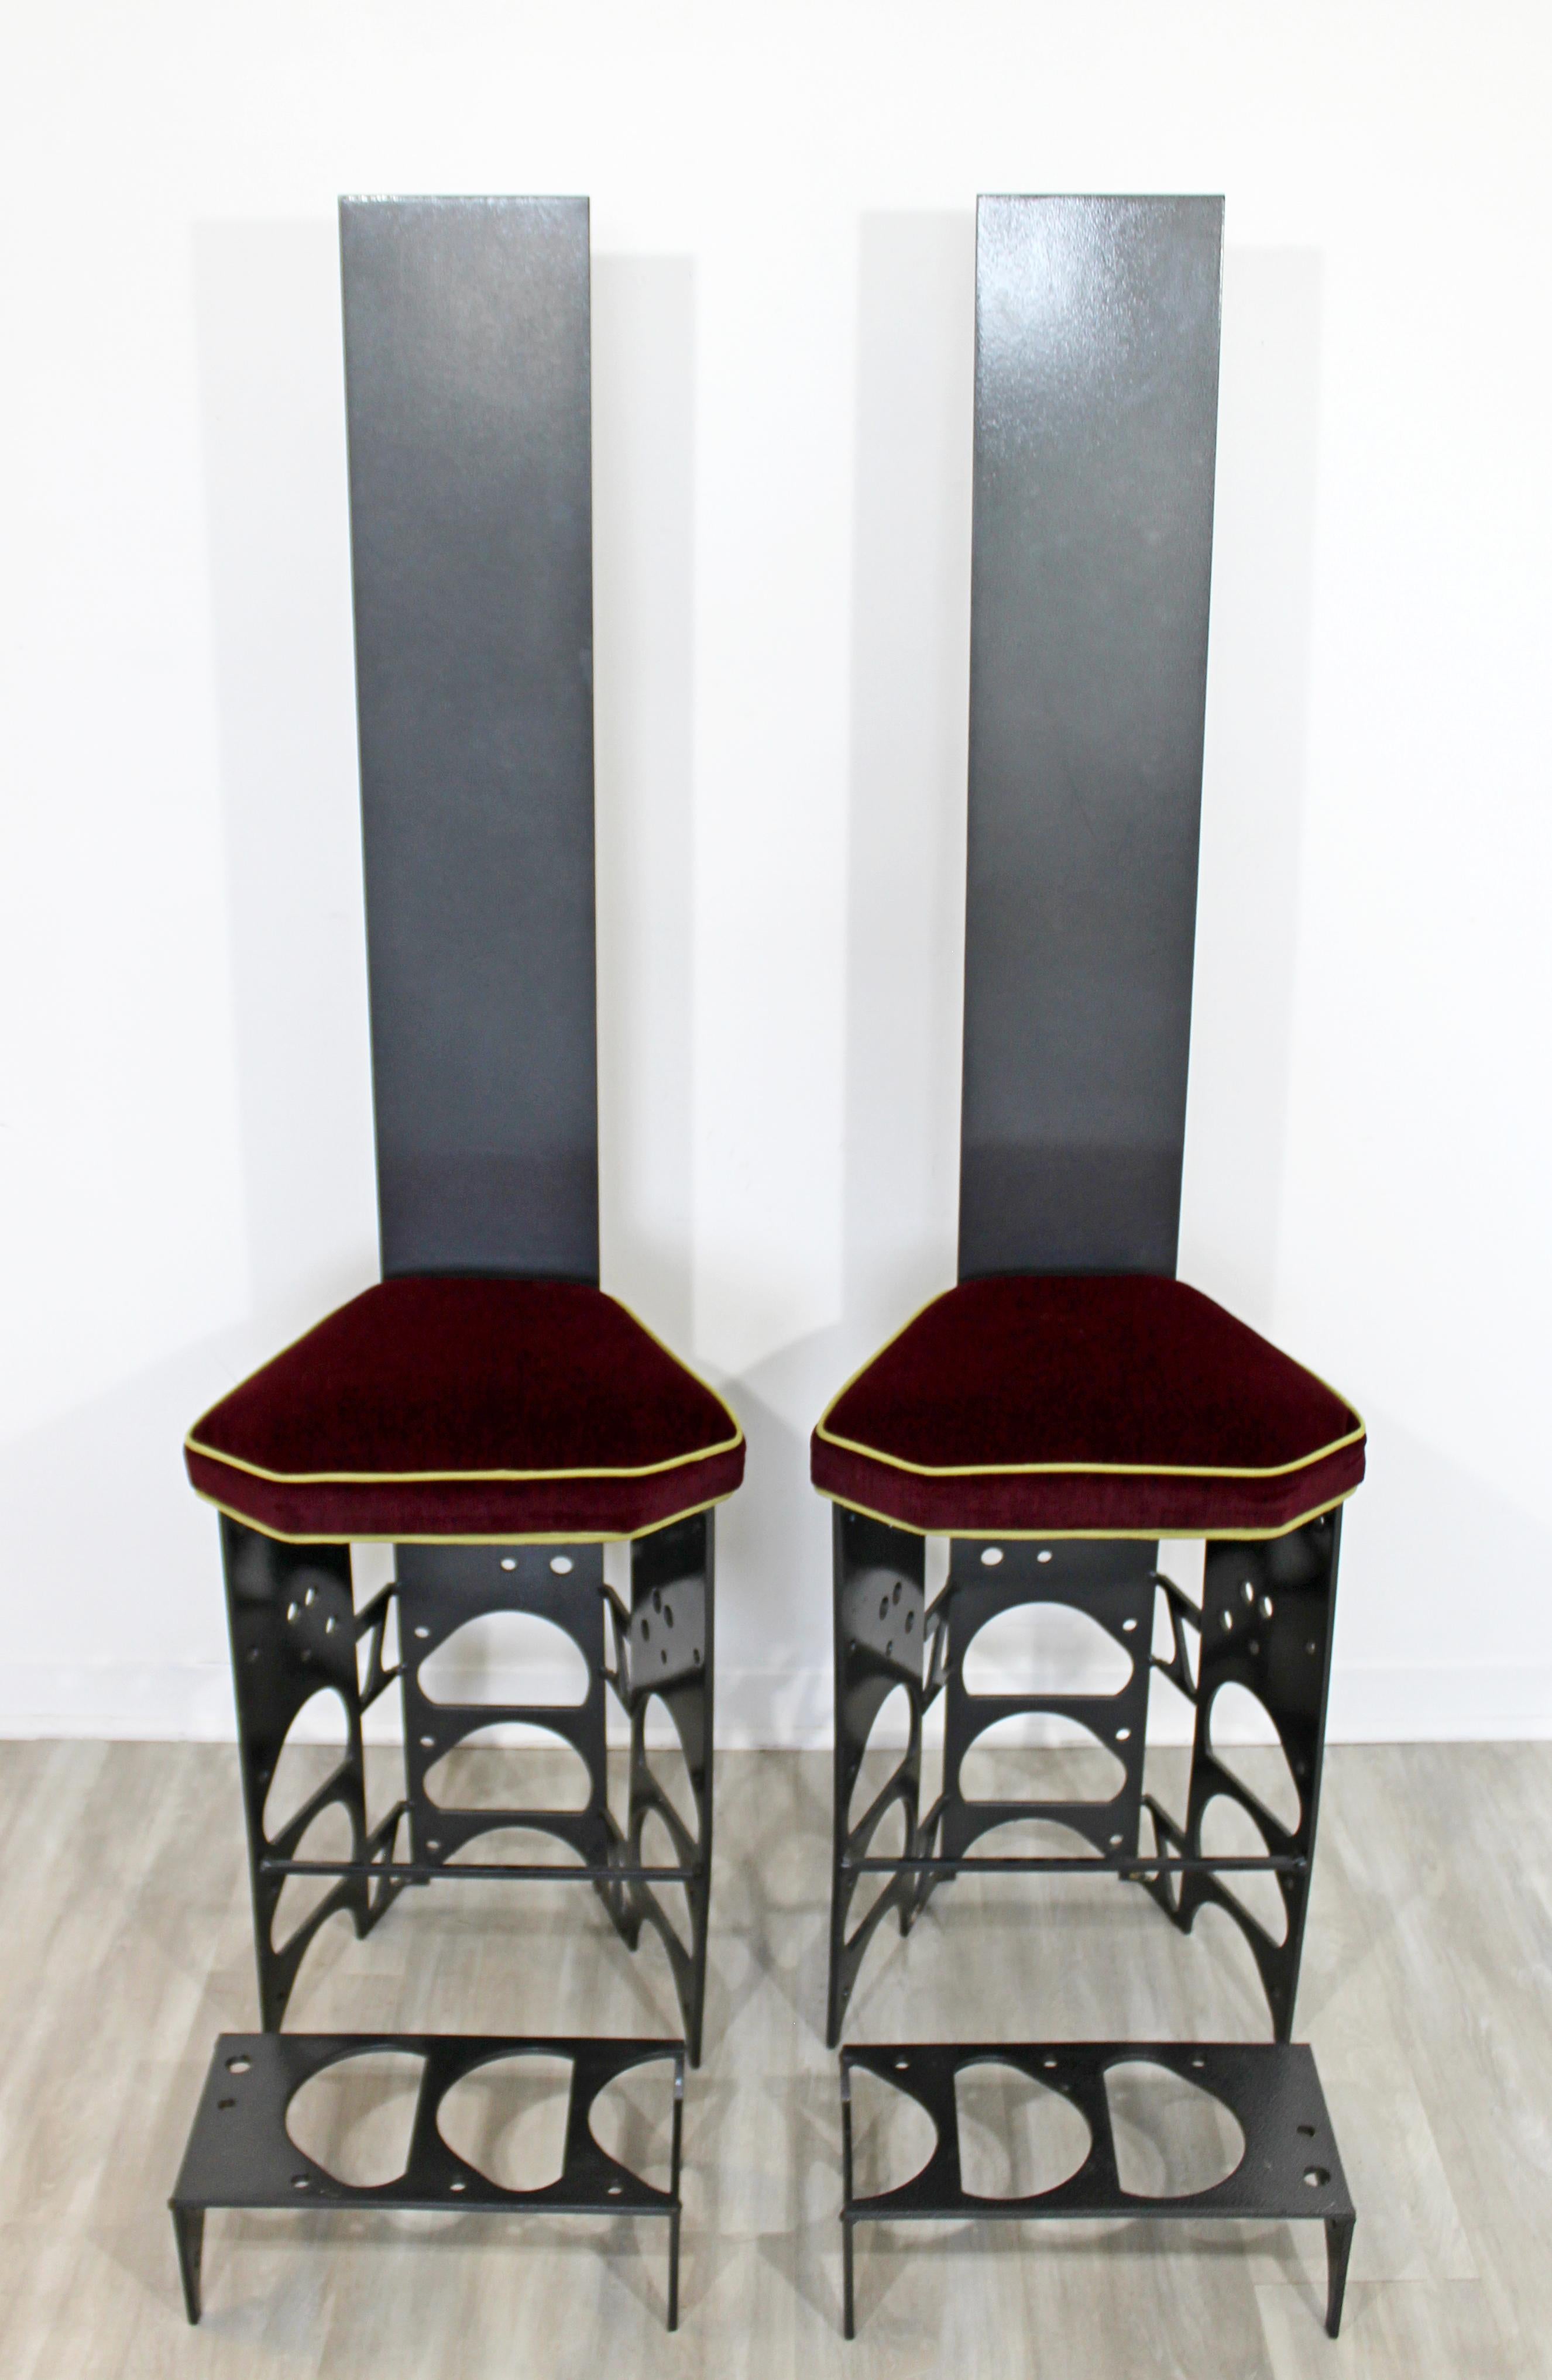 Art Deco Contemporary Modern Ironsworks King and Queen Pair of Iron Art Chairs & Ottomans